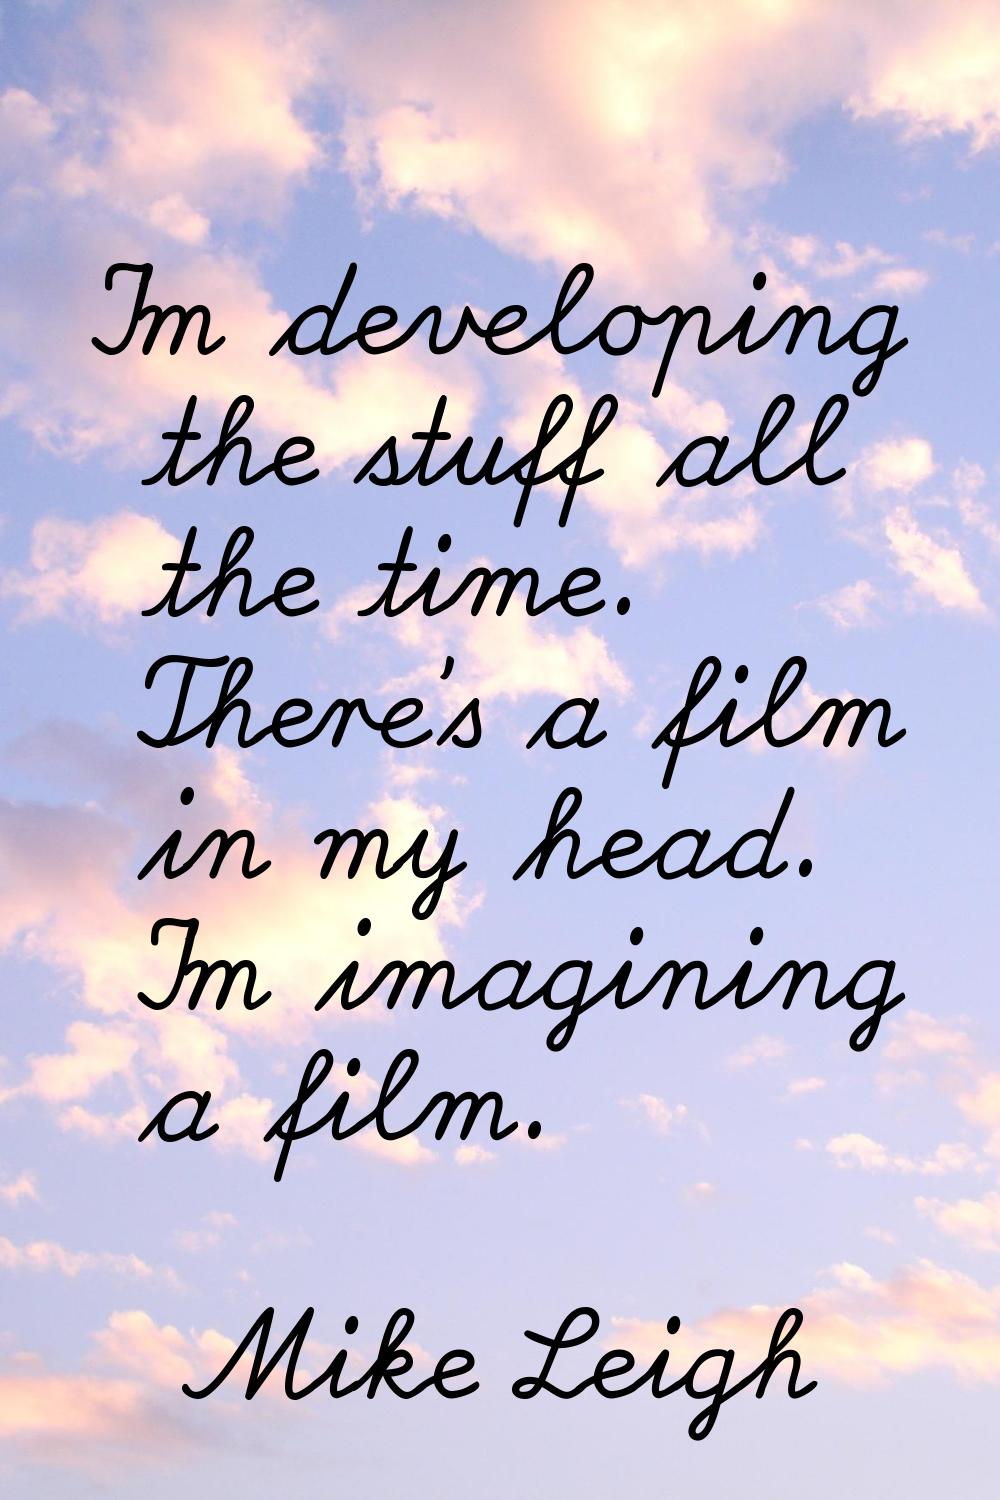 I'm developing the stuff all the time. There's a film in my head. I'm imagining a film.